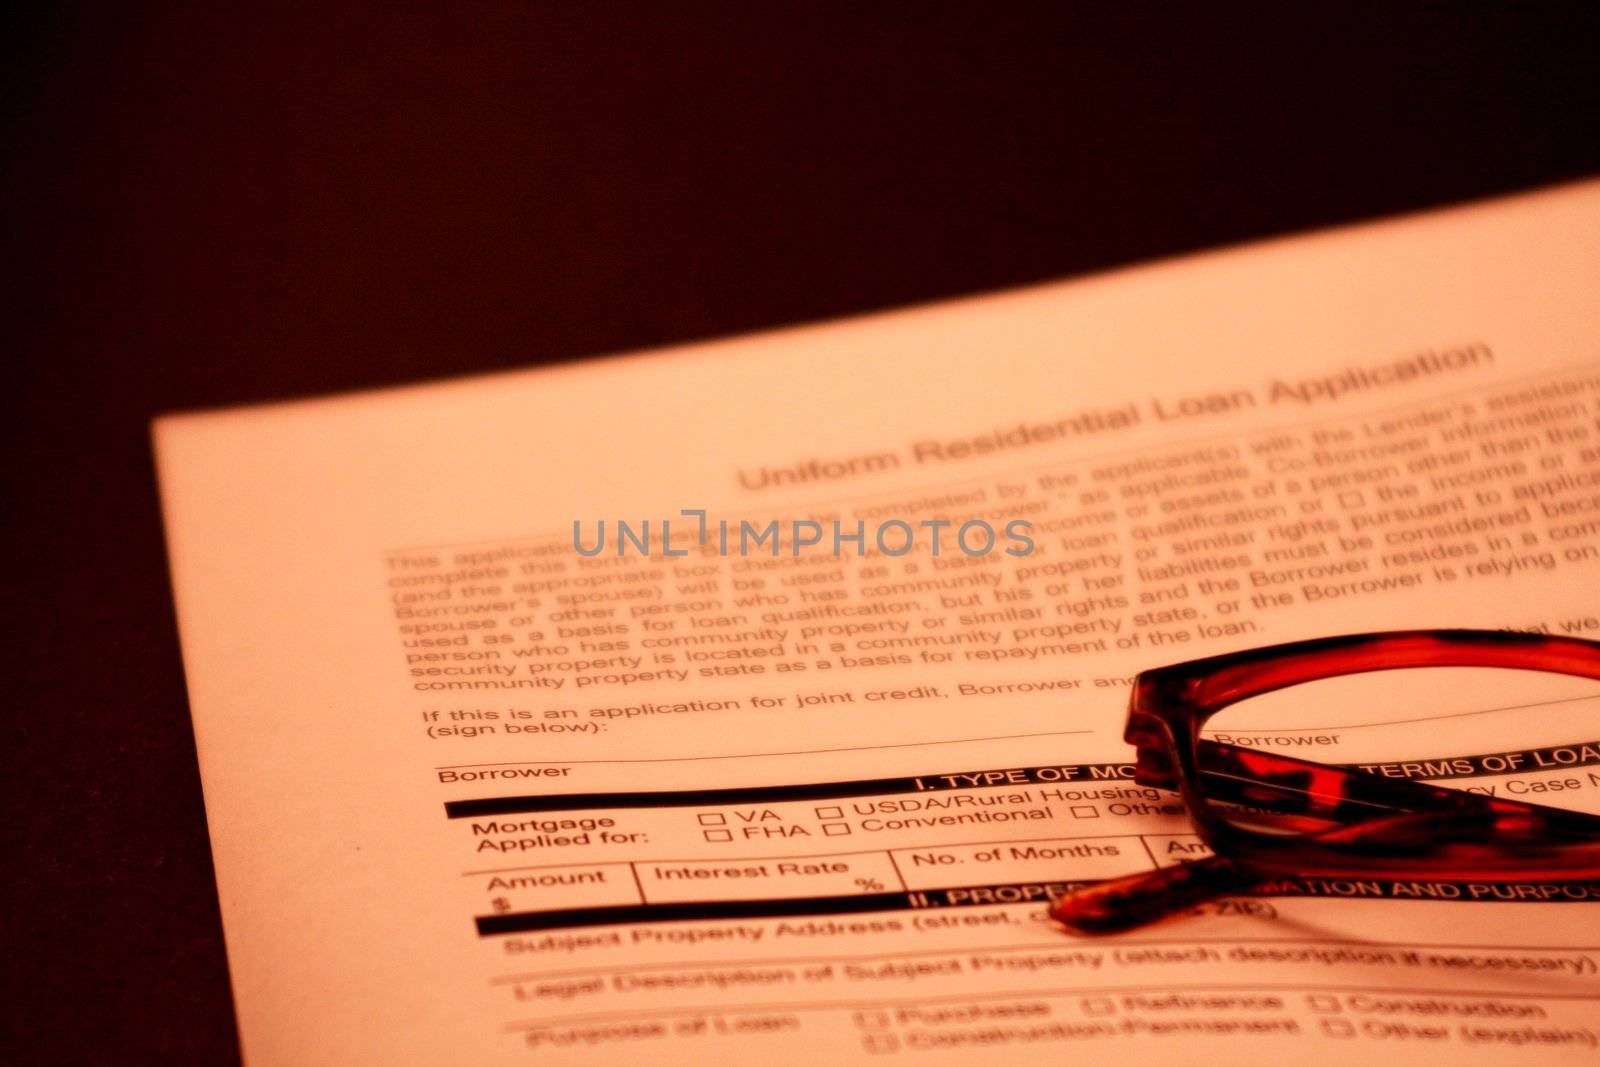 Home loan application against black background. Financial document for mortgage loan with a pair of glasses in the foreground.